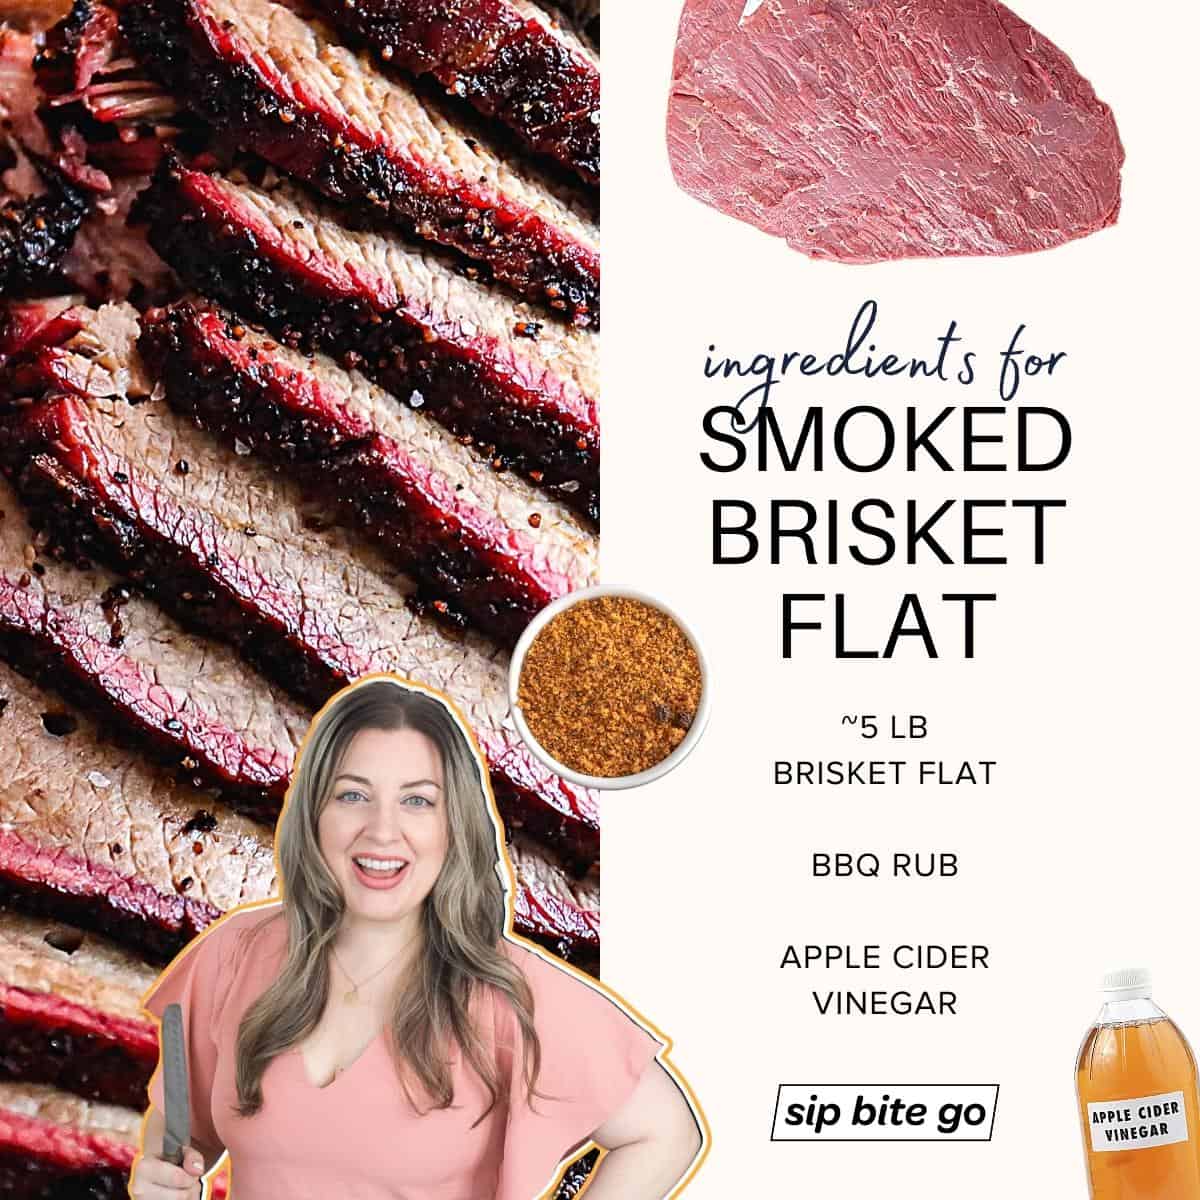 Infographic with ingredients for smoked brisket flat on the traeger pellet grill